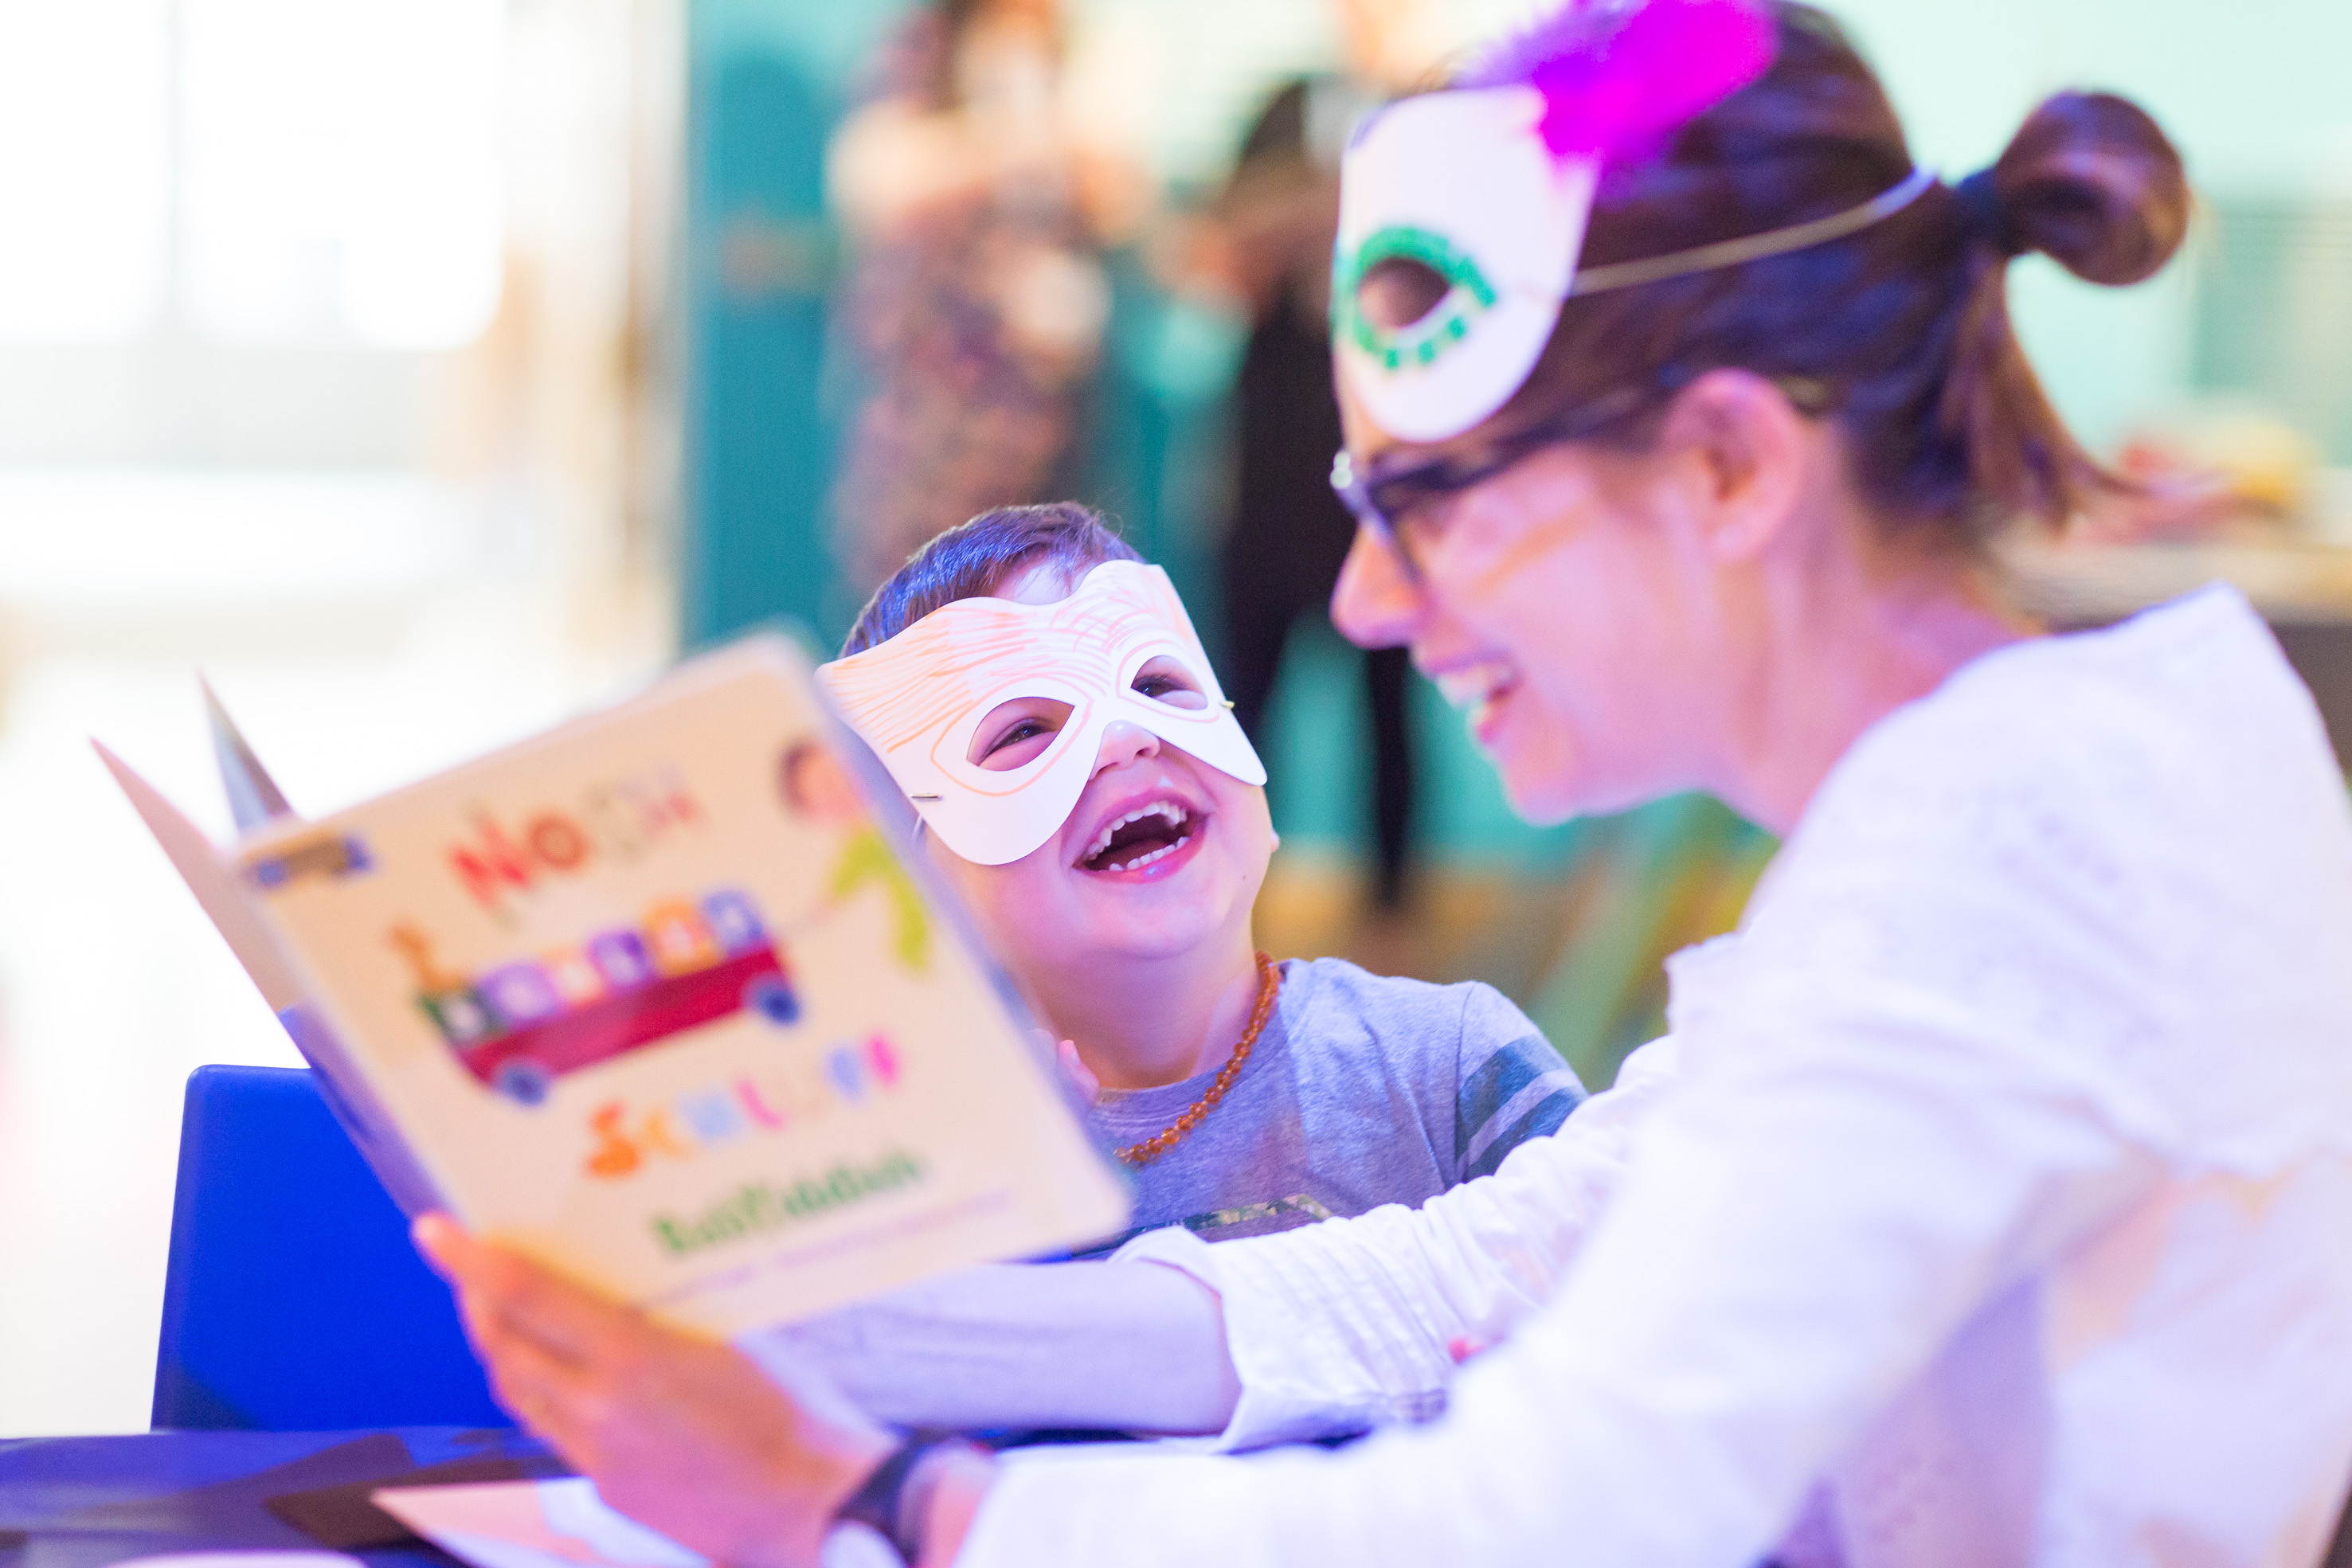 Adult female reads to small child who sis laughing. Both are wearing masks